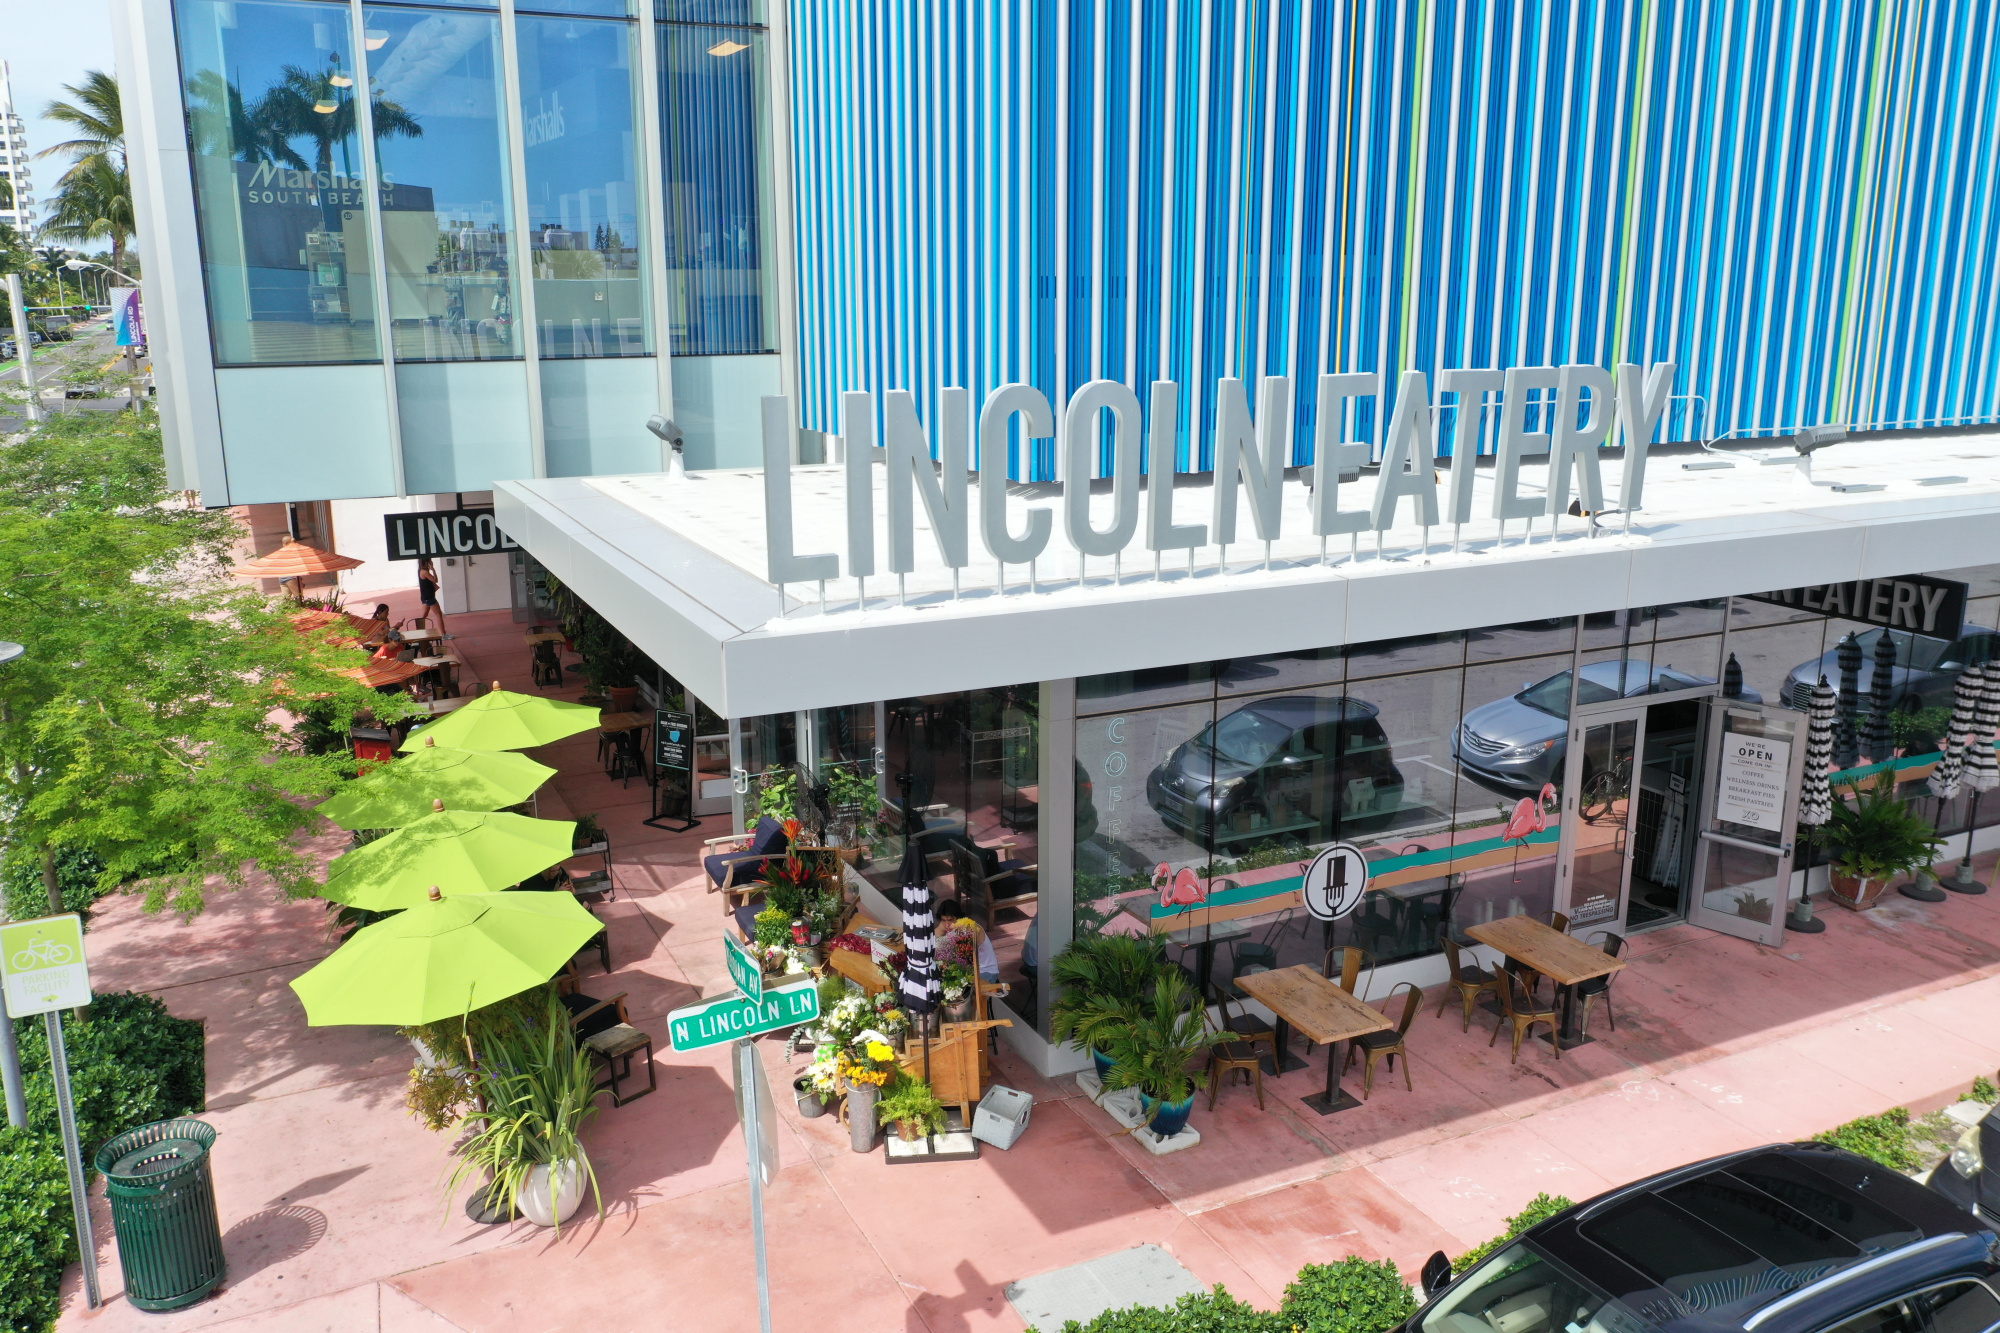 miami vacation guide, exterior of The Lincoln eatery food hall in Miami Beach, Florida